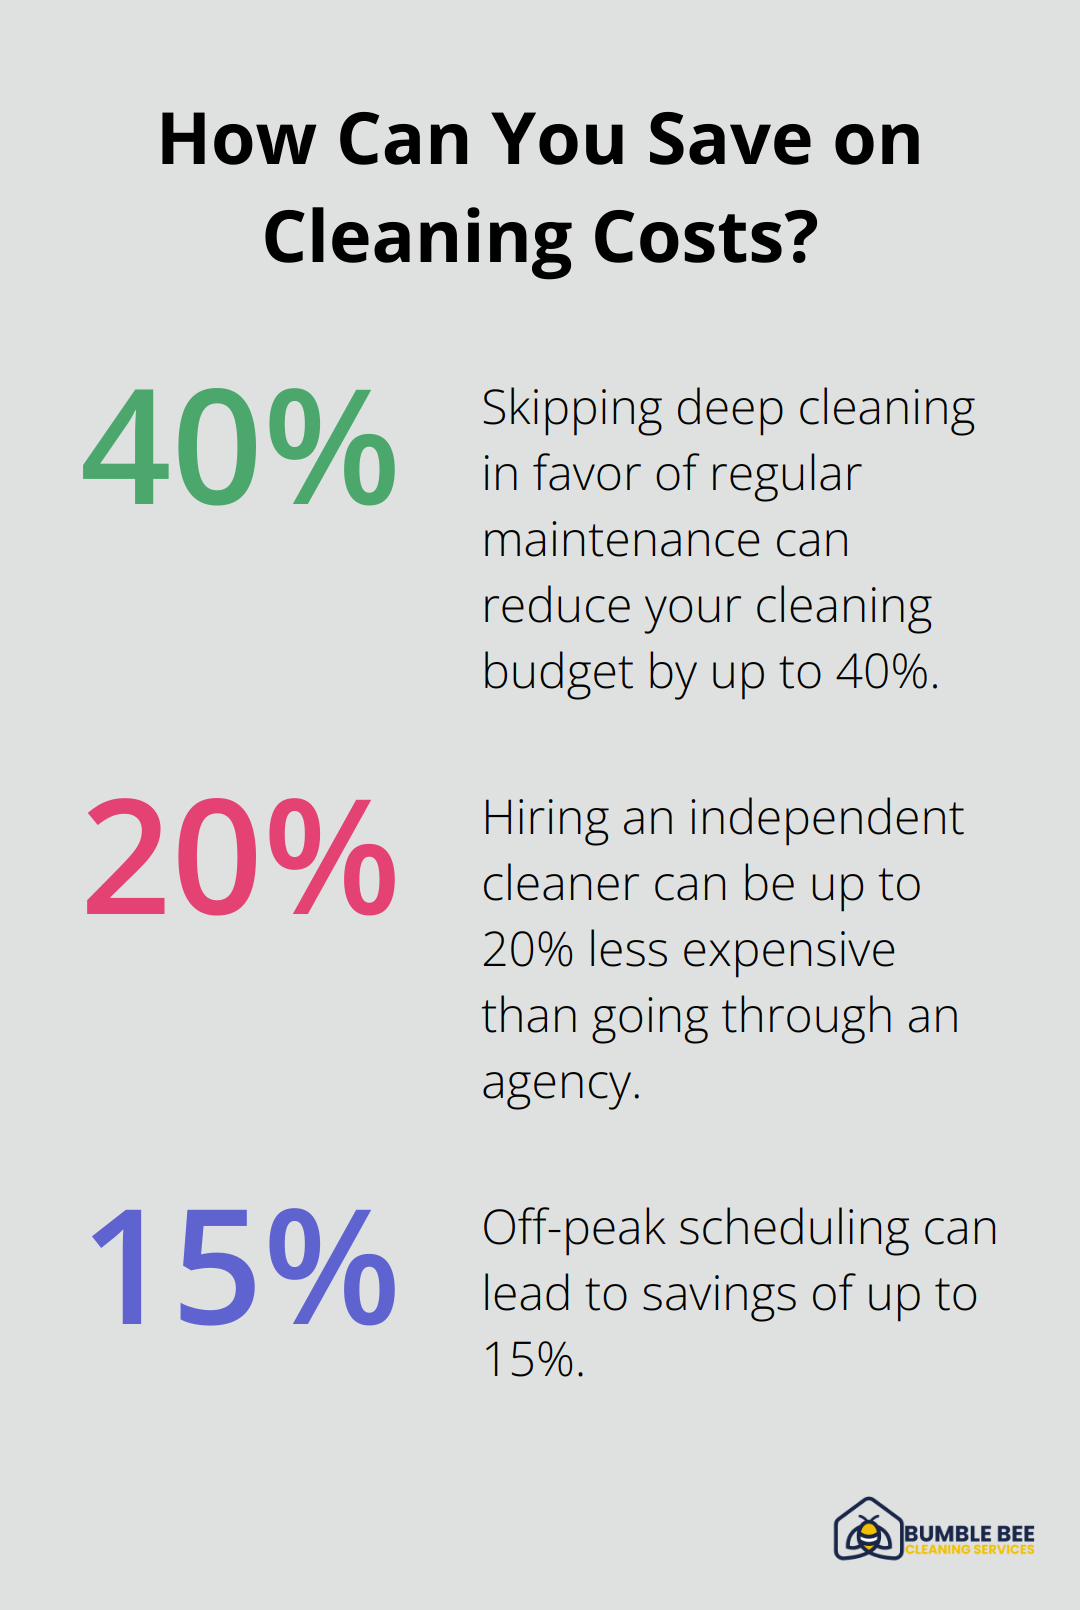 Fact - How Can You Save on Cleaning Costs?